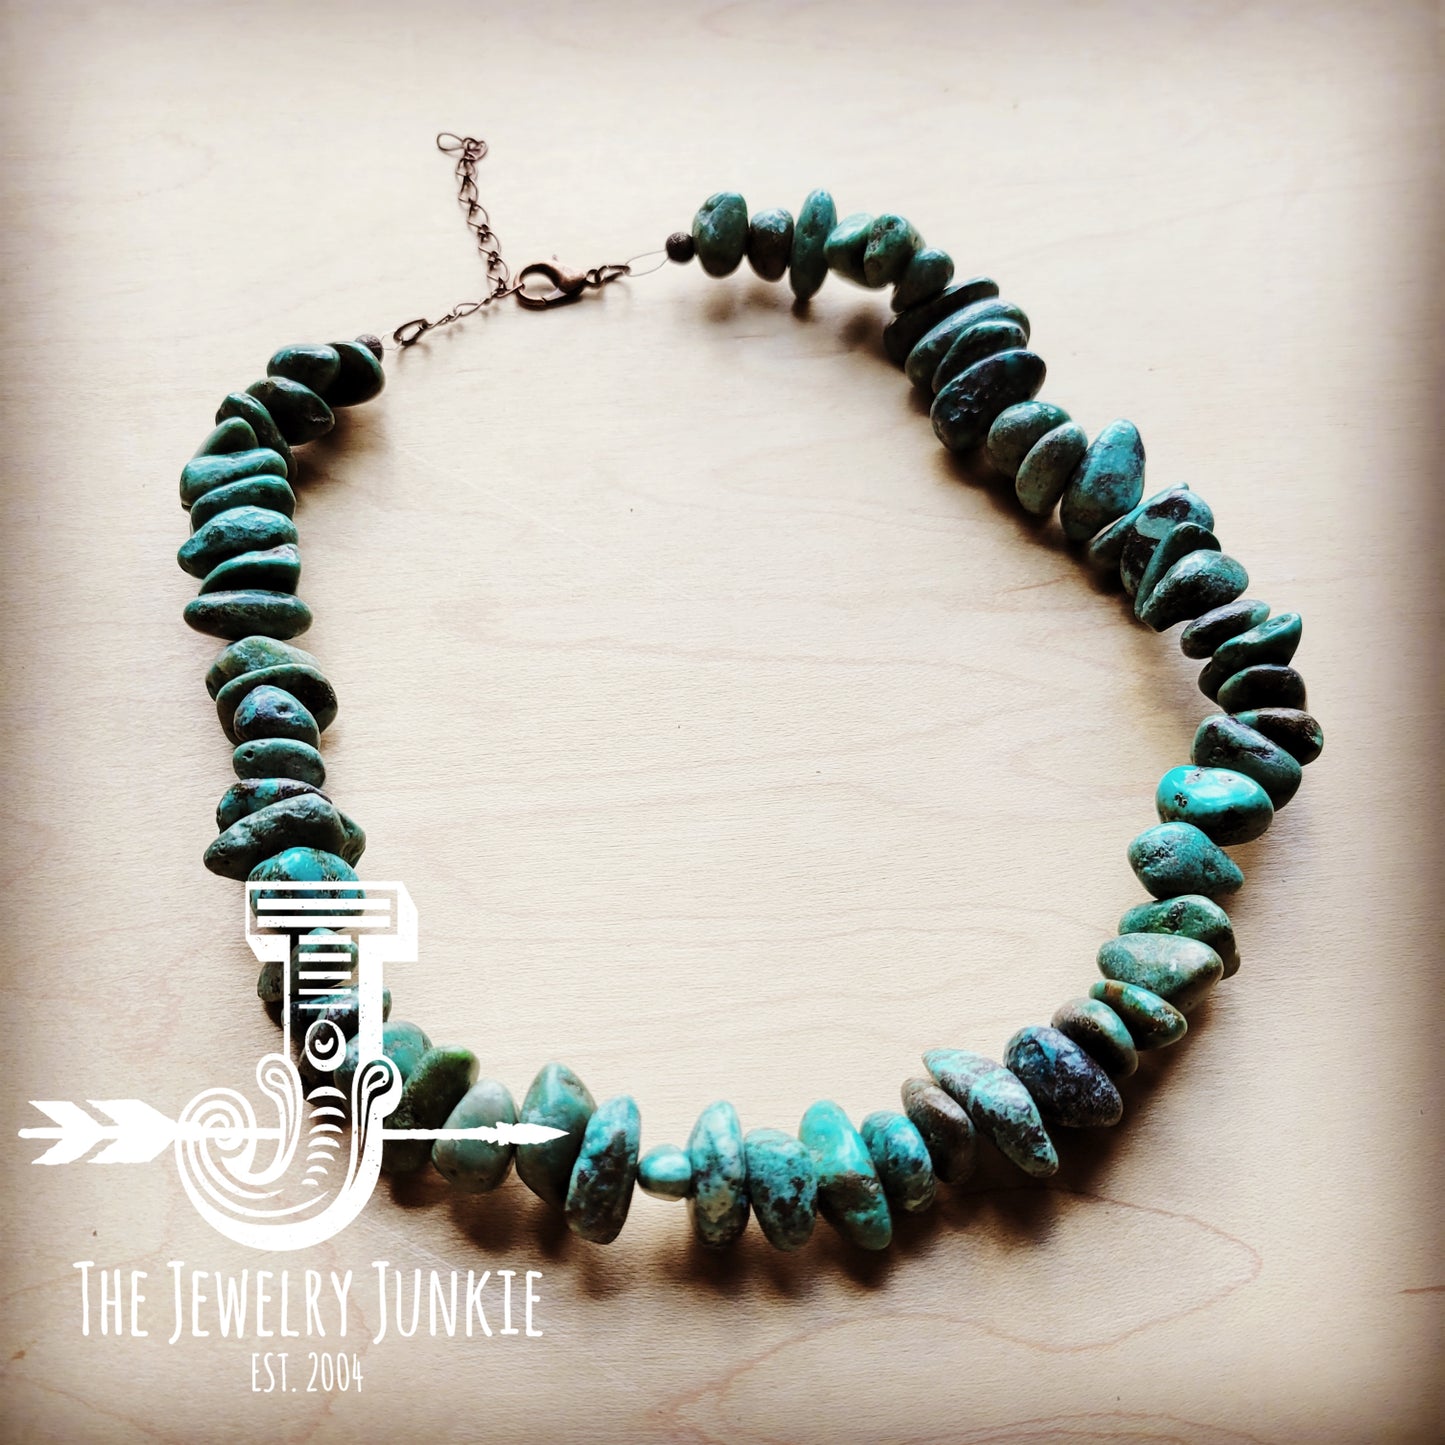 Chunky Natural Turquoise Collar Length Necklace (245b)